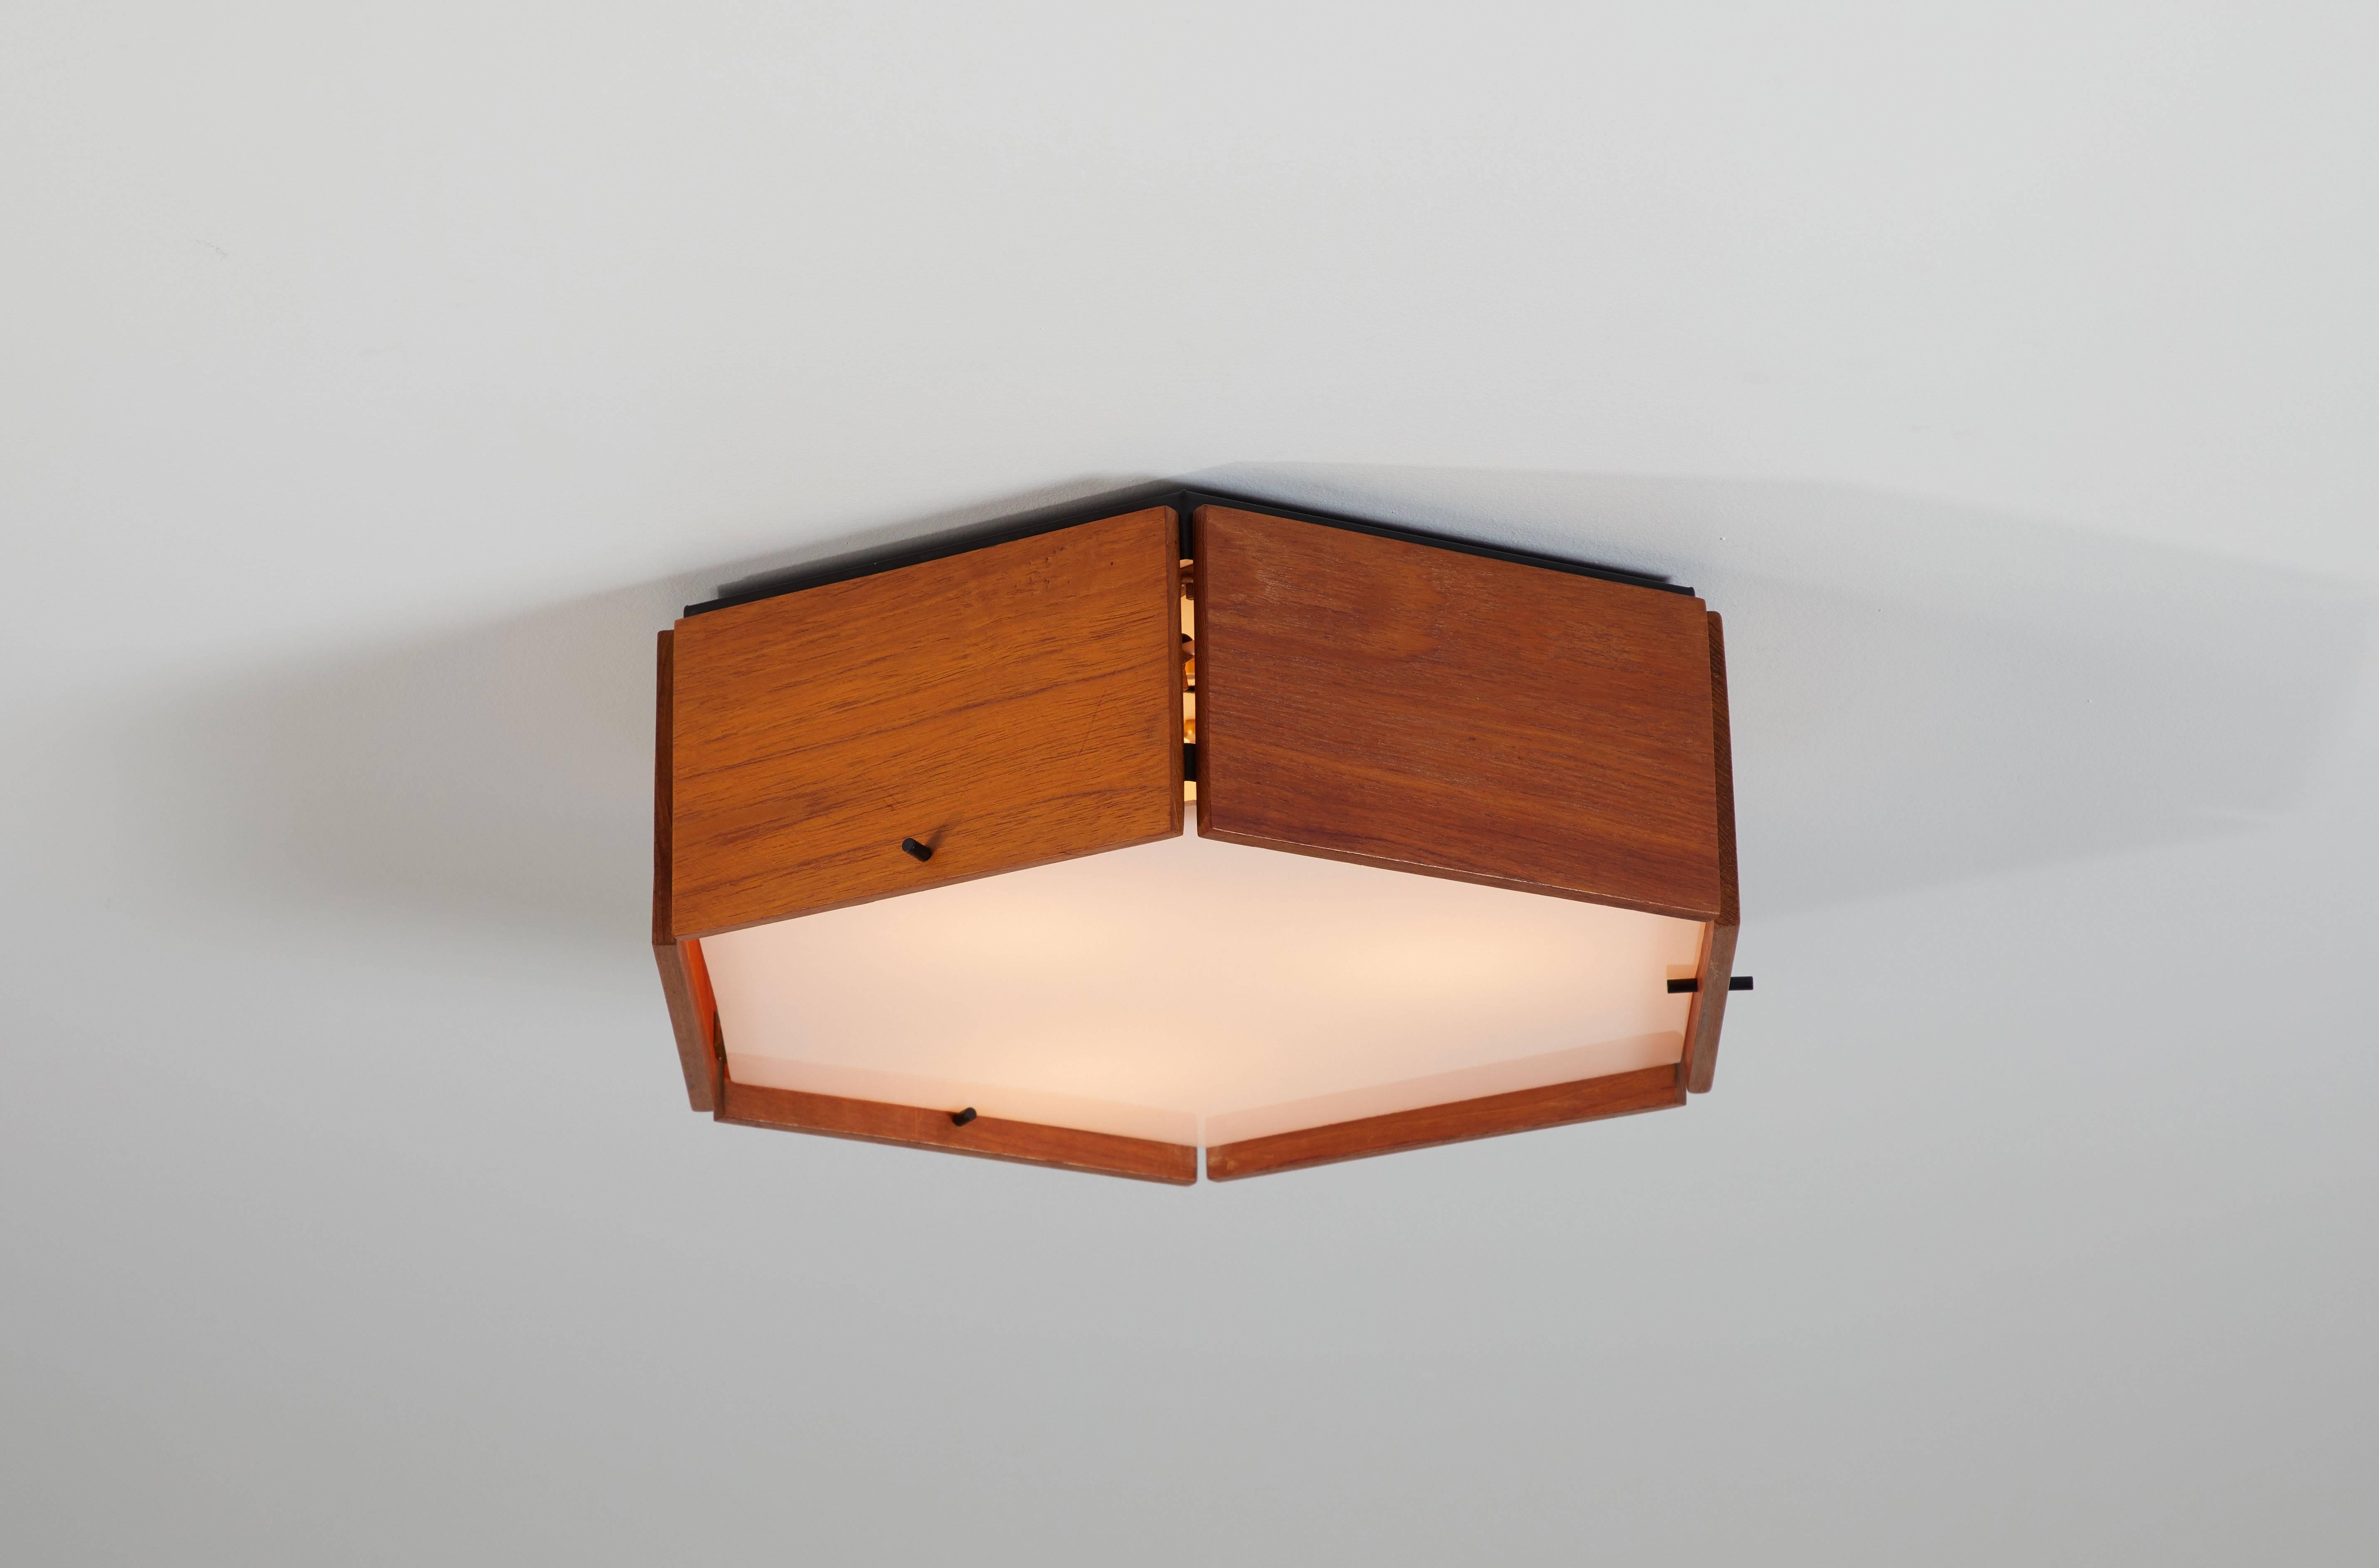 Two teak and acrylic hexagonal flush mount ceiling lights by Reggiani designed in Italy, circa 1960s. Priced and sold individually. Wired for US junction boxes. Each sconce takes three E27 25w maximum bulbs.
